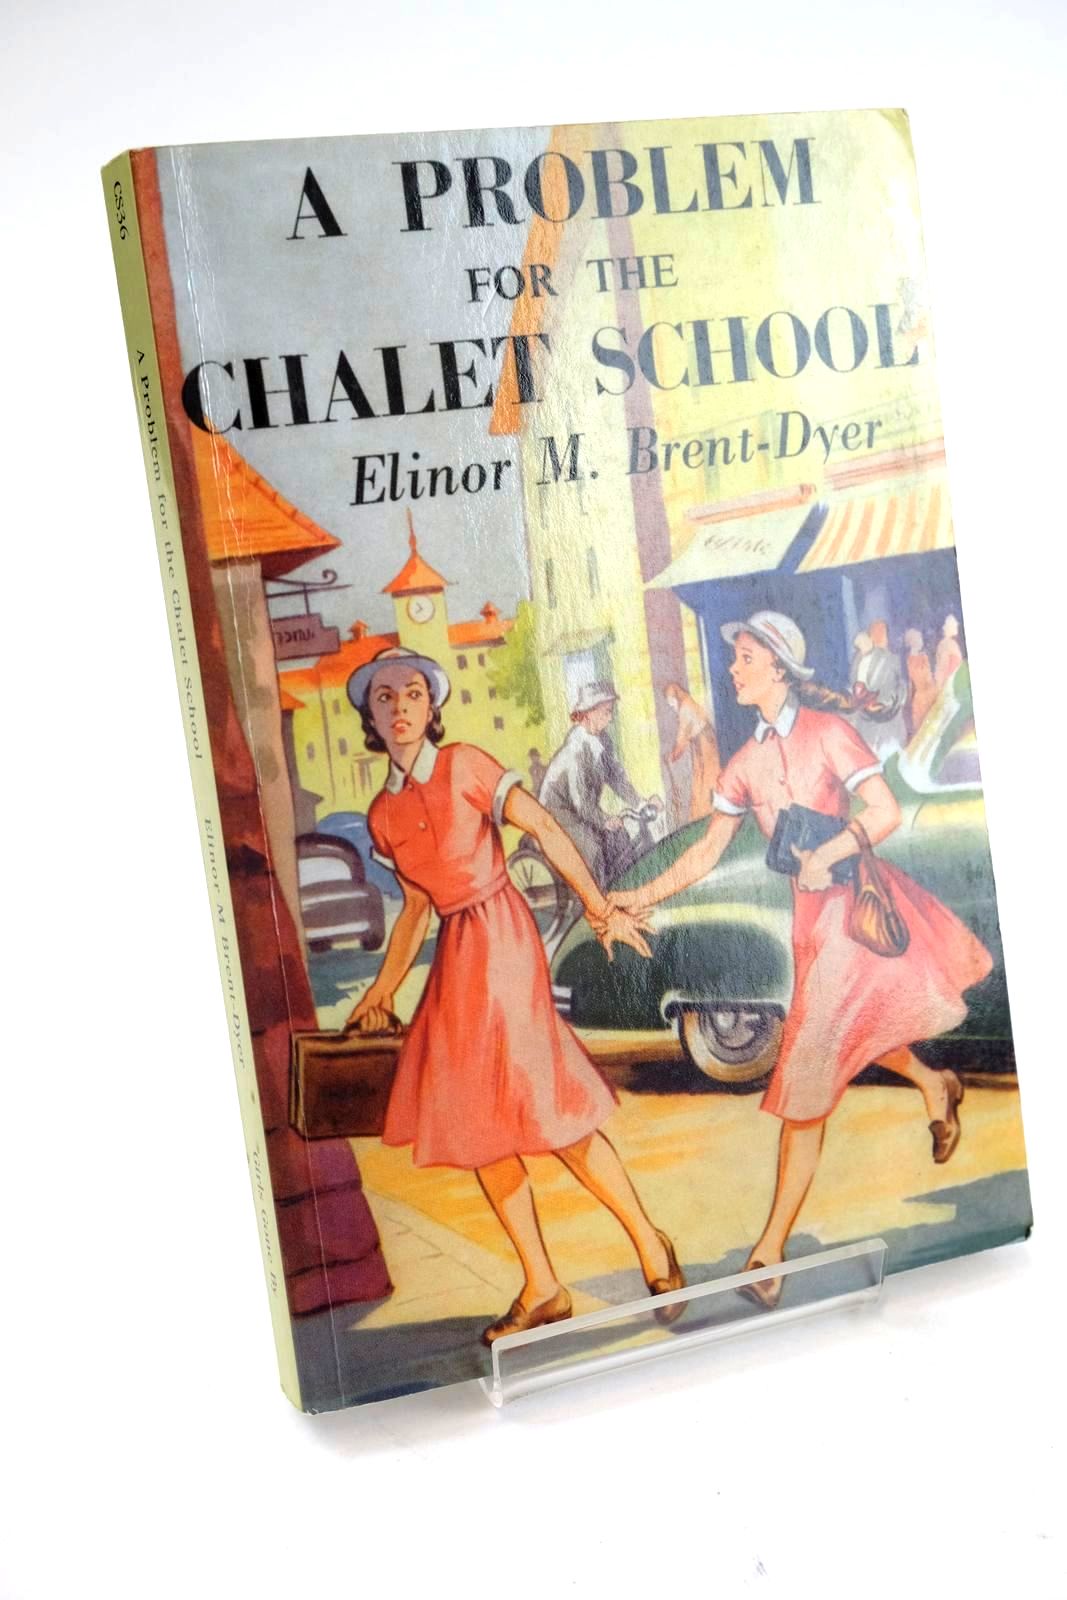 Photo of A PROBLEM FOR THE CHALET SCHOOL written by Brent-Dyer, Elinor M. illustrated by Brook, D. published by Girls Gone By (STOCK CODE: 1324202)  for sale by Stella & Rose's Books